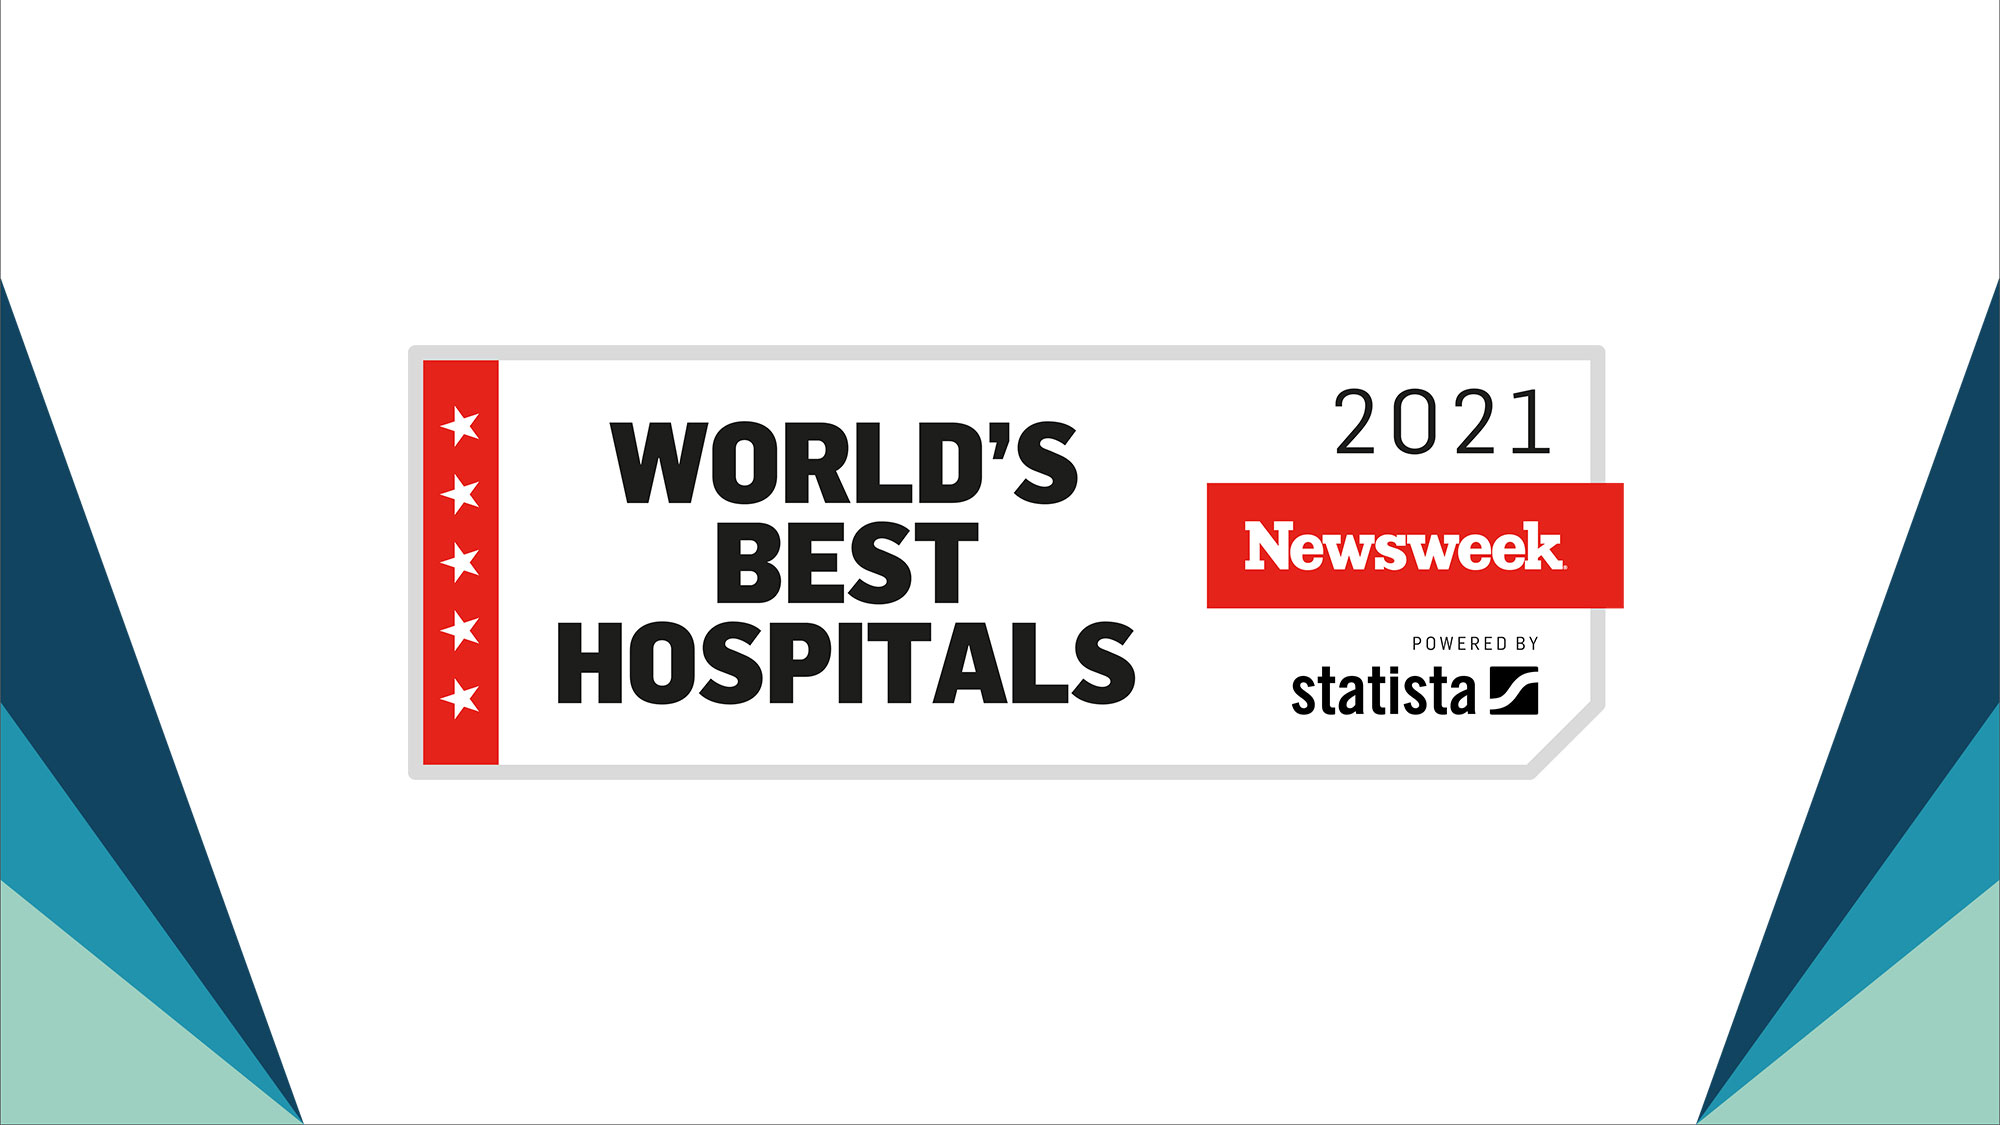 St. John’s Health Named to World’s Best Hospitals List by Newsweek